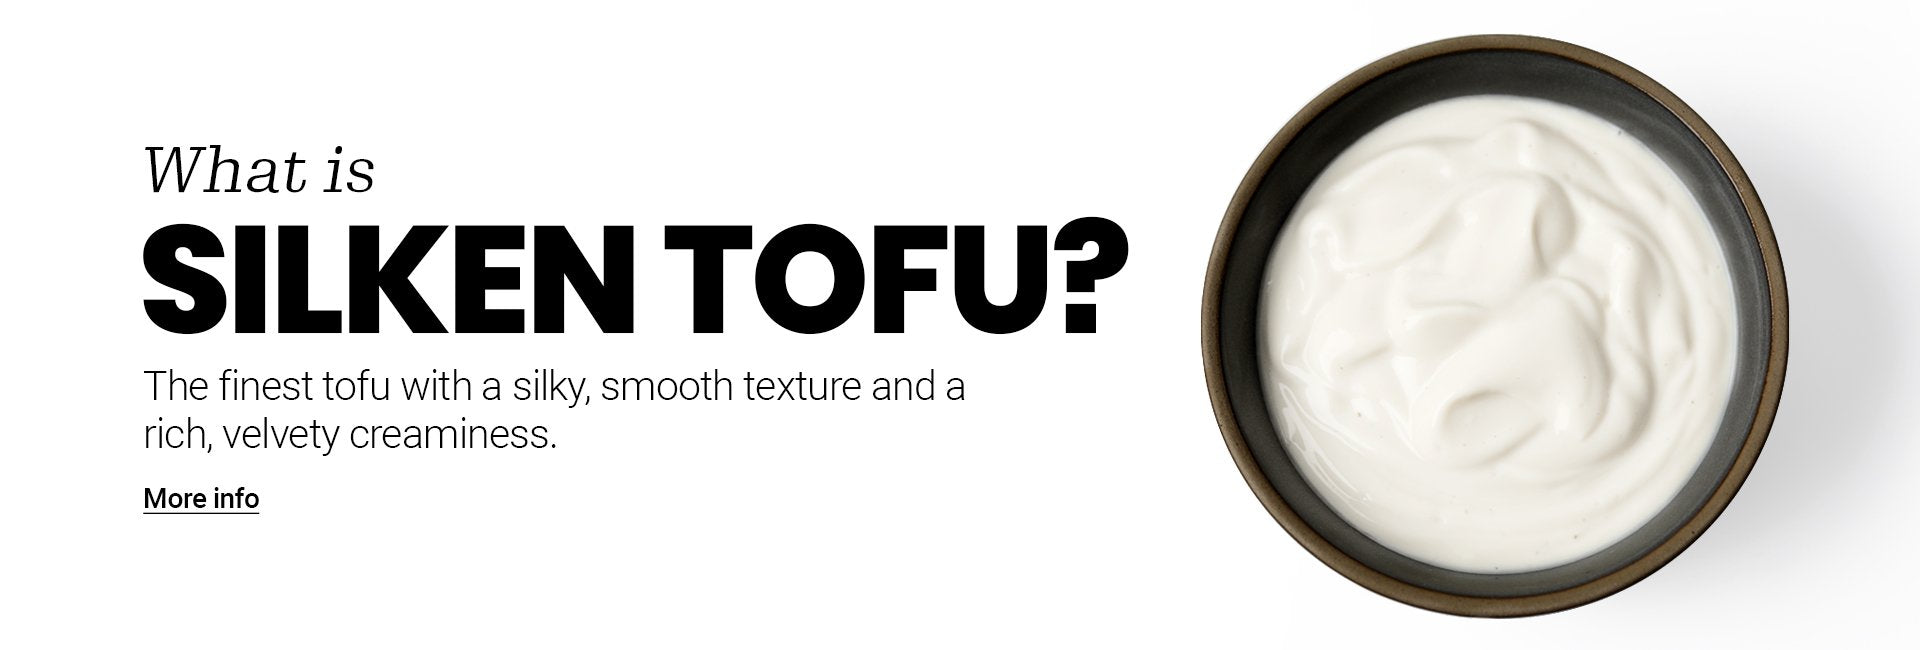 What is Silken Tofu? The finished tofu with a silky smooth texture and rich creaminess